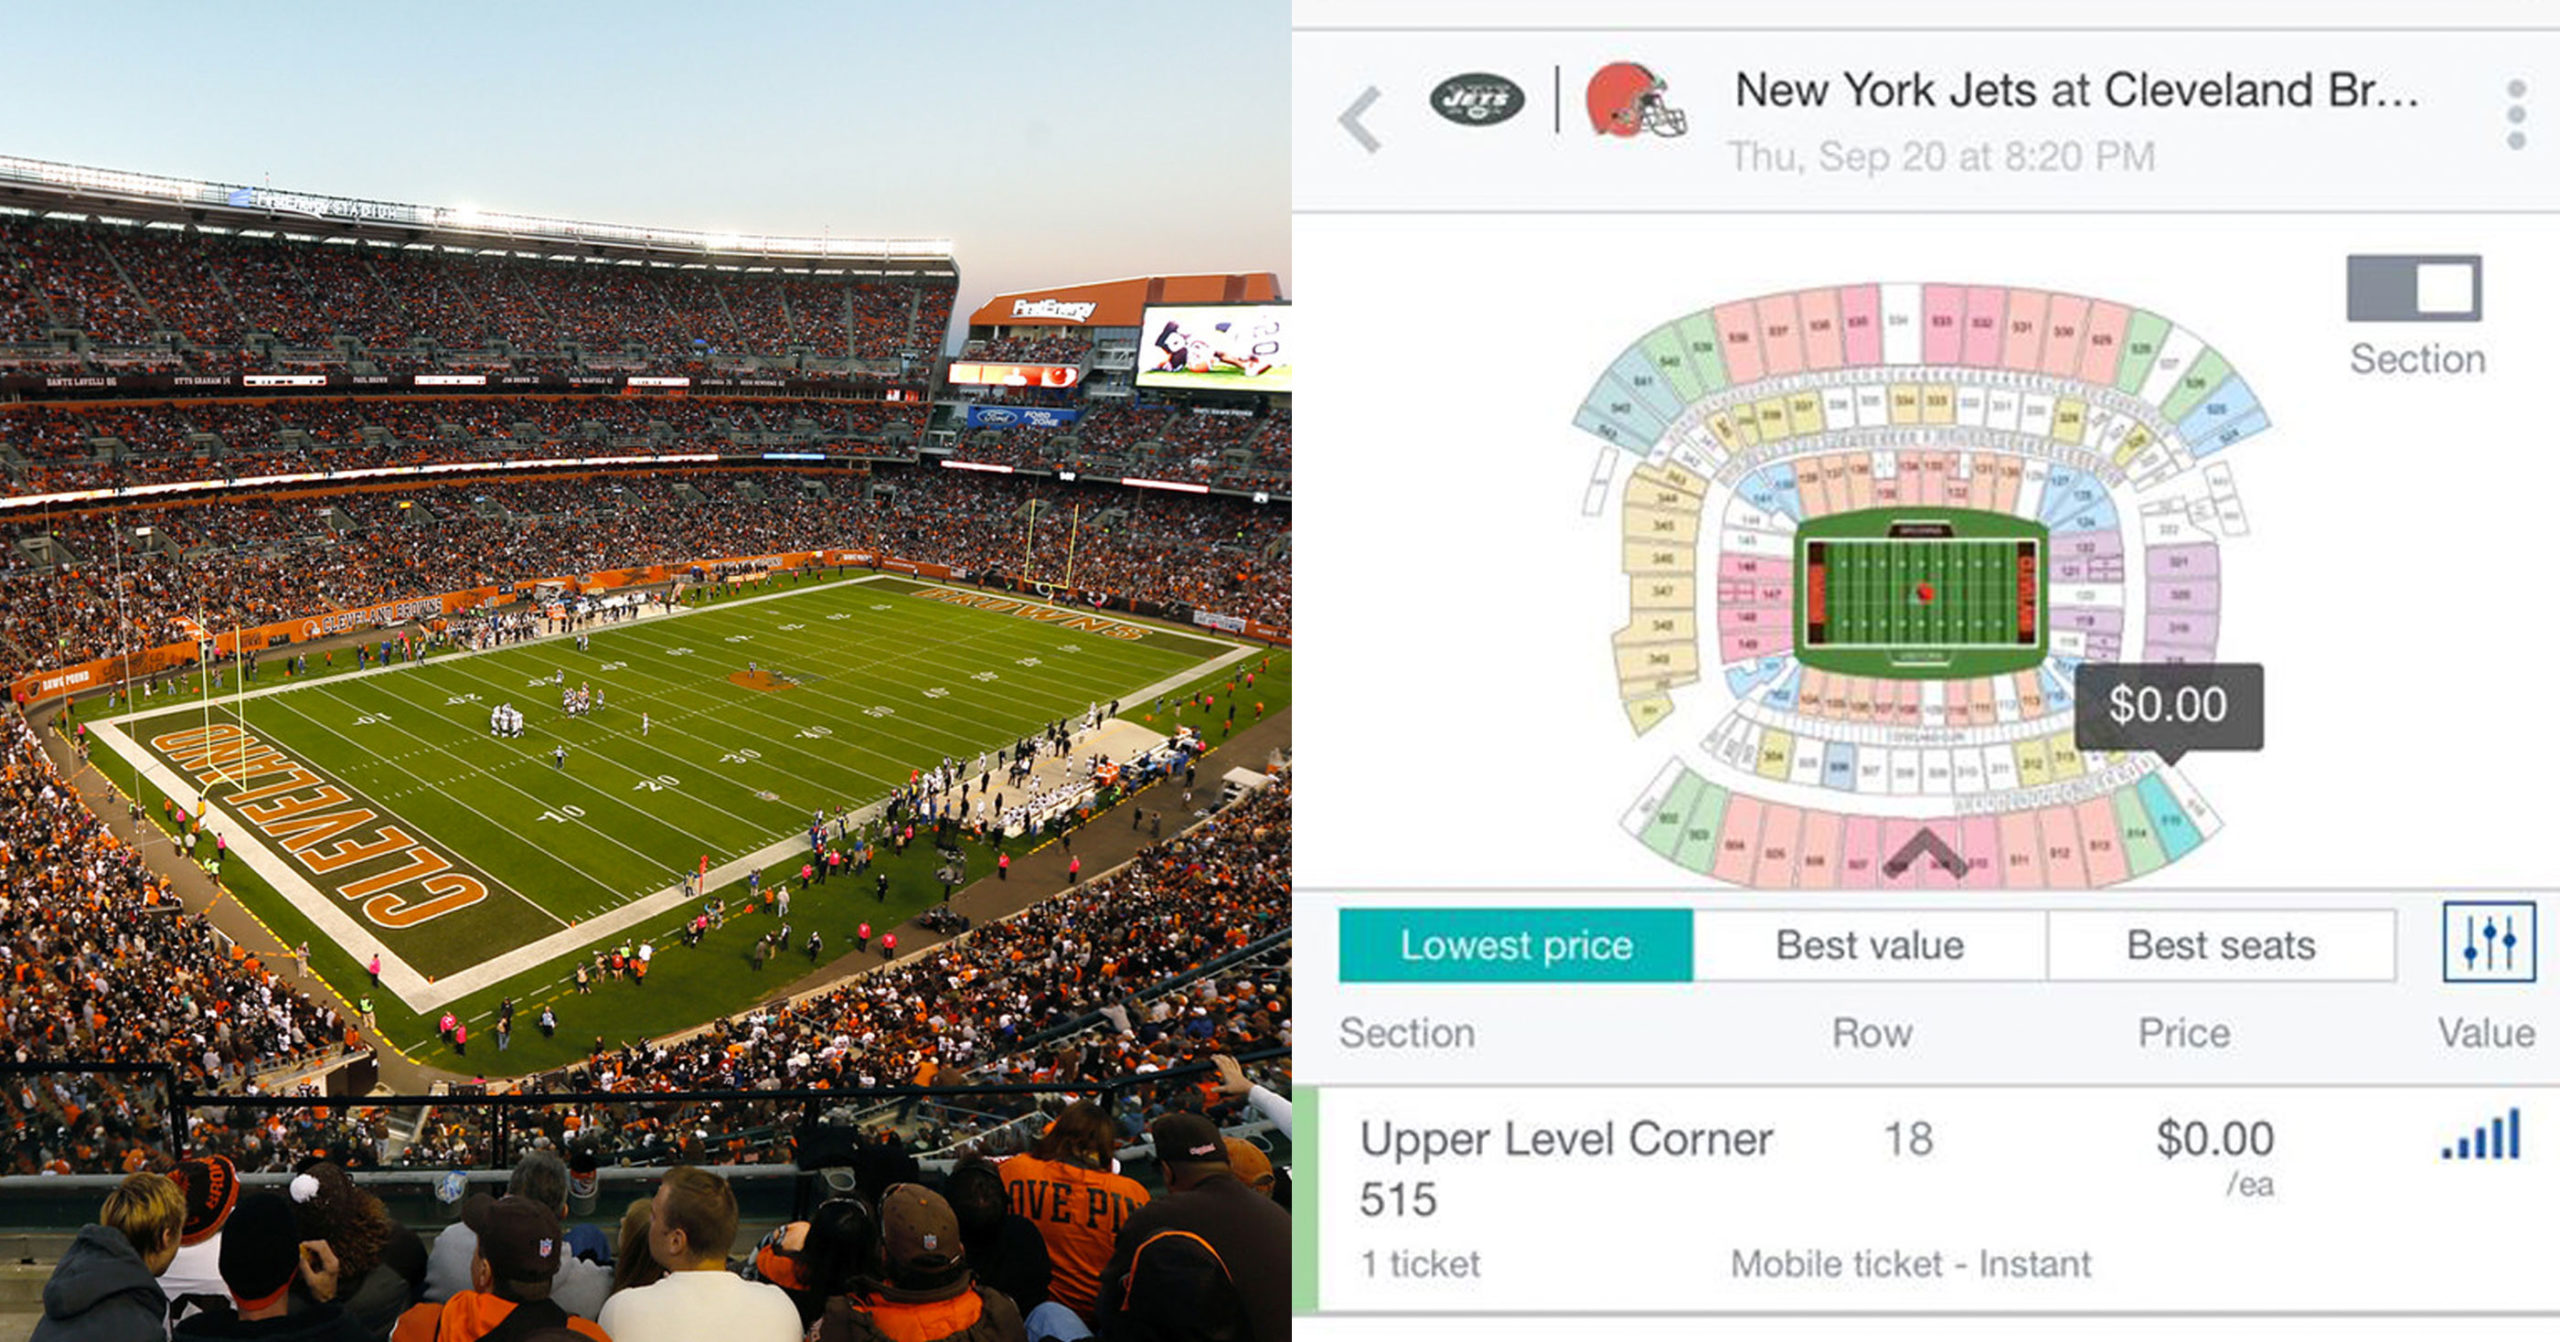 Tickets For Browns vs. Jets Thursday Night Game Going For Whopping 0.00